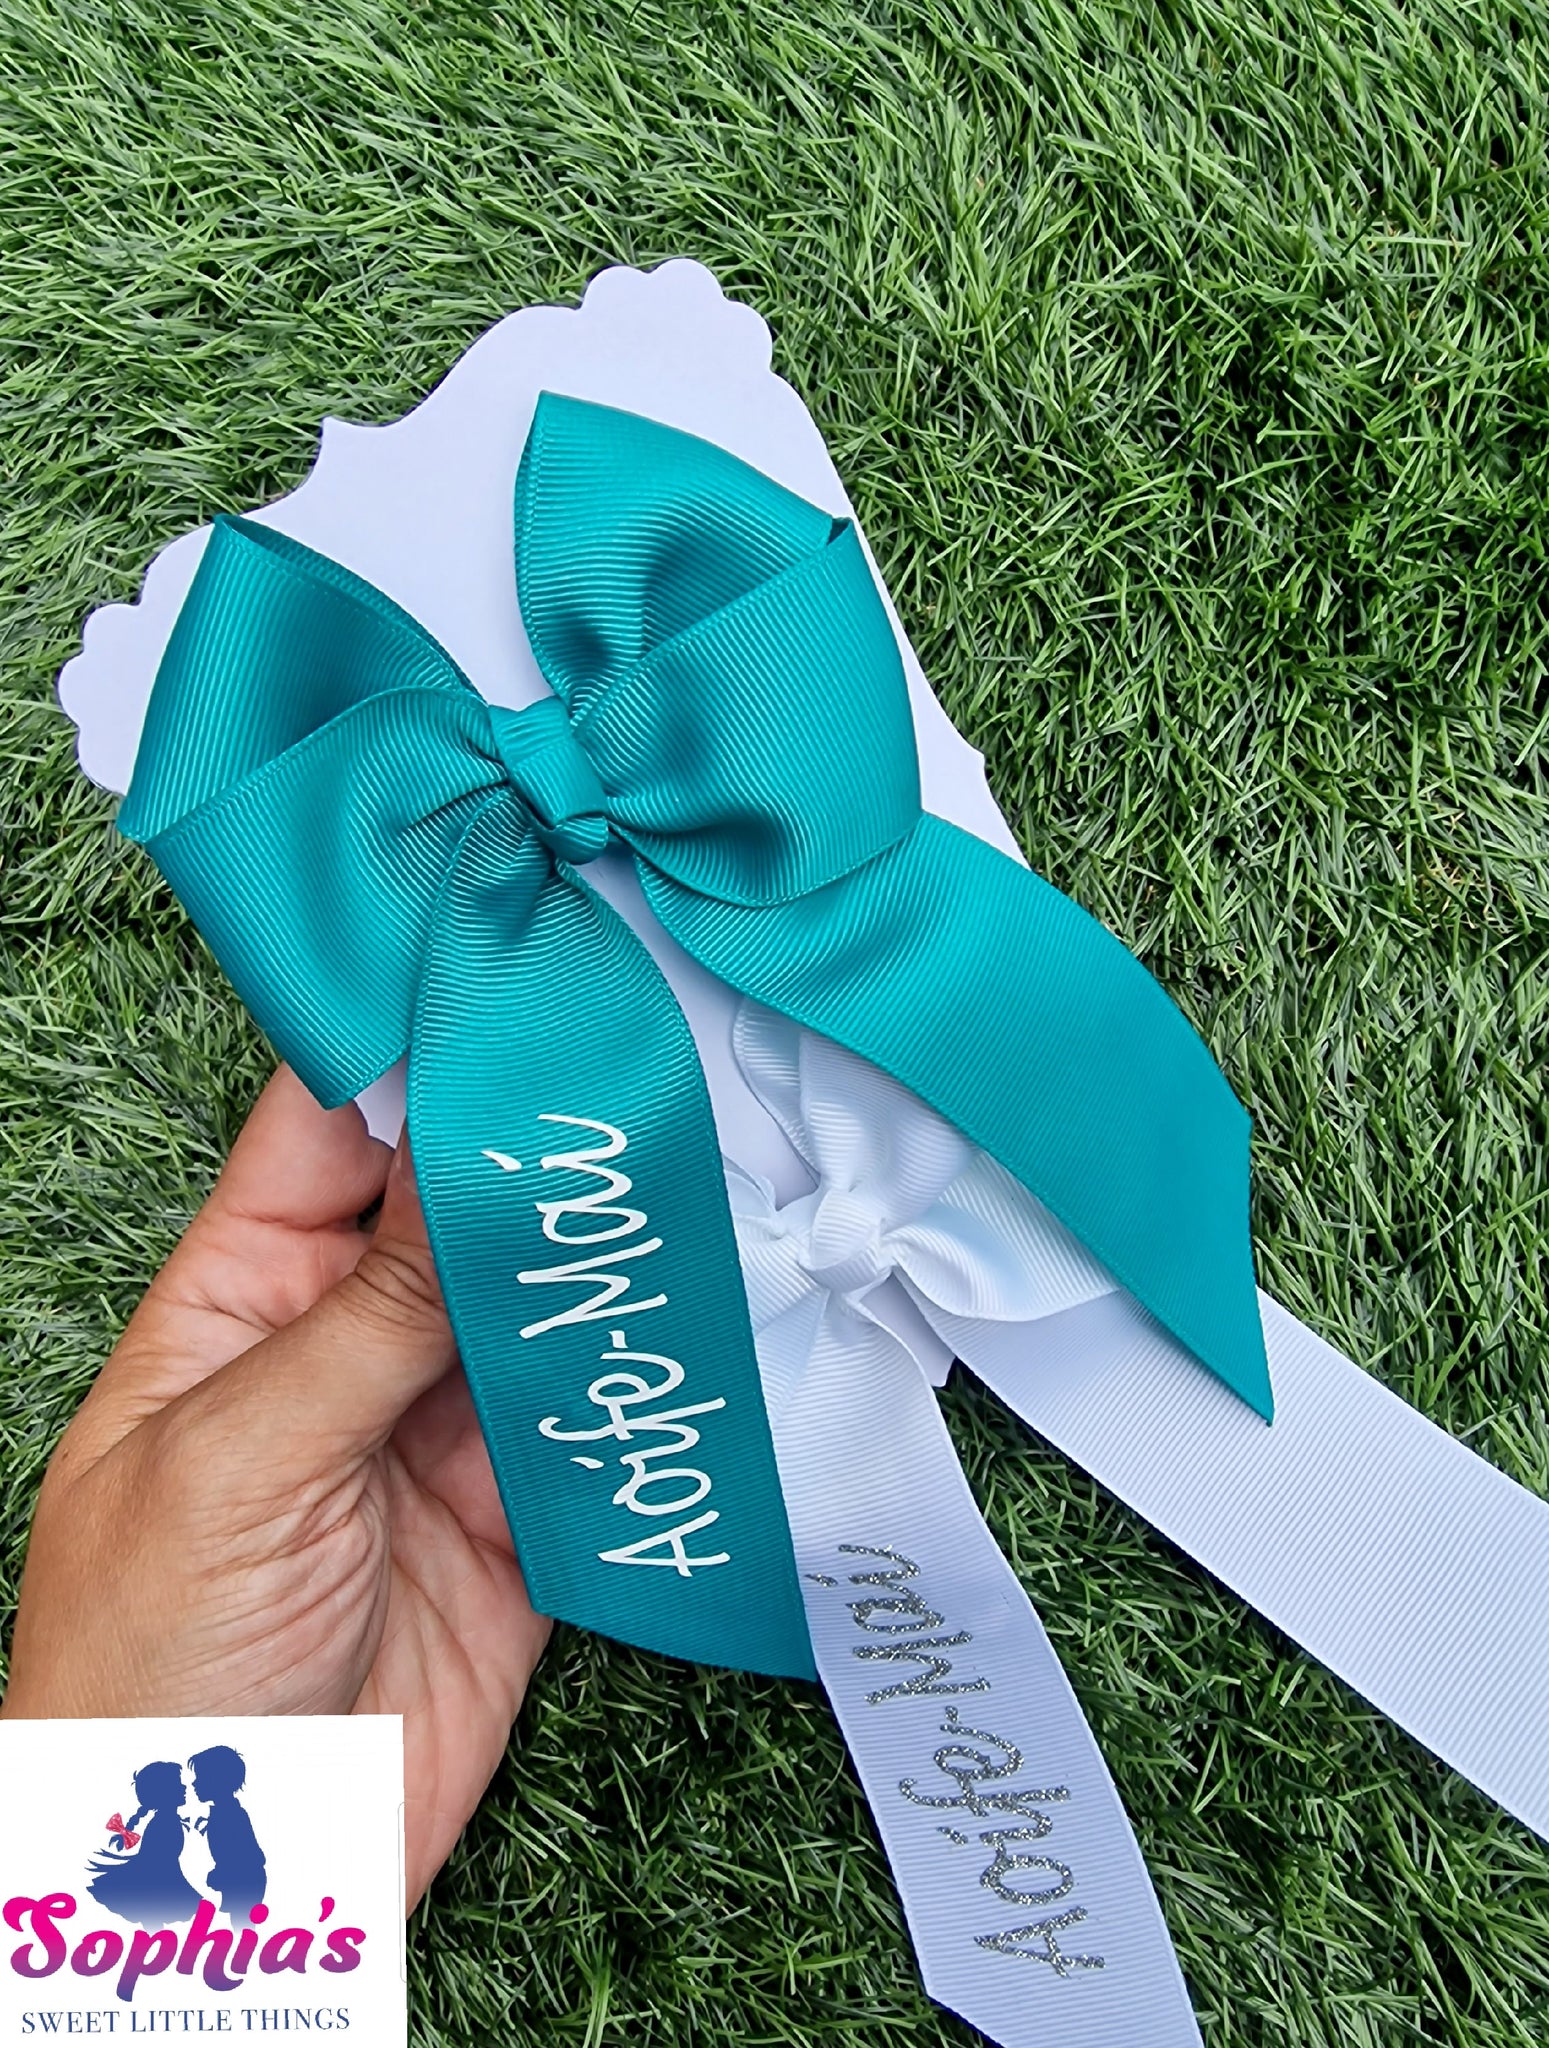 Teal & White Personalised Tails down Bows